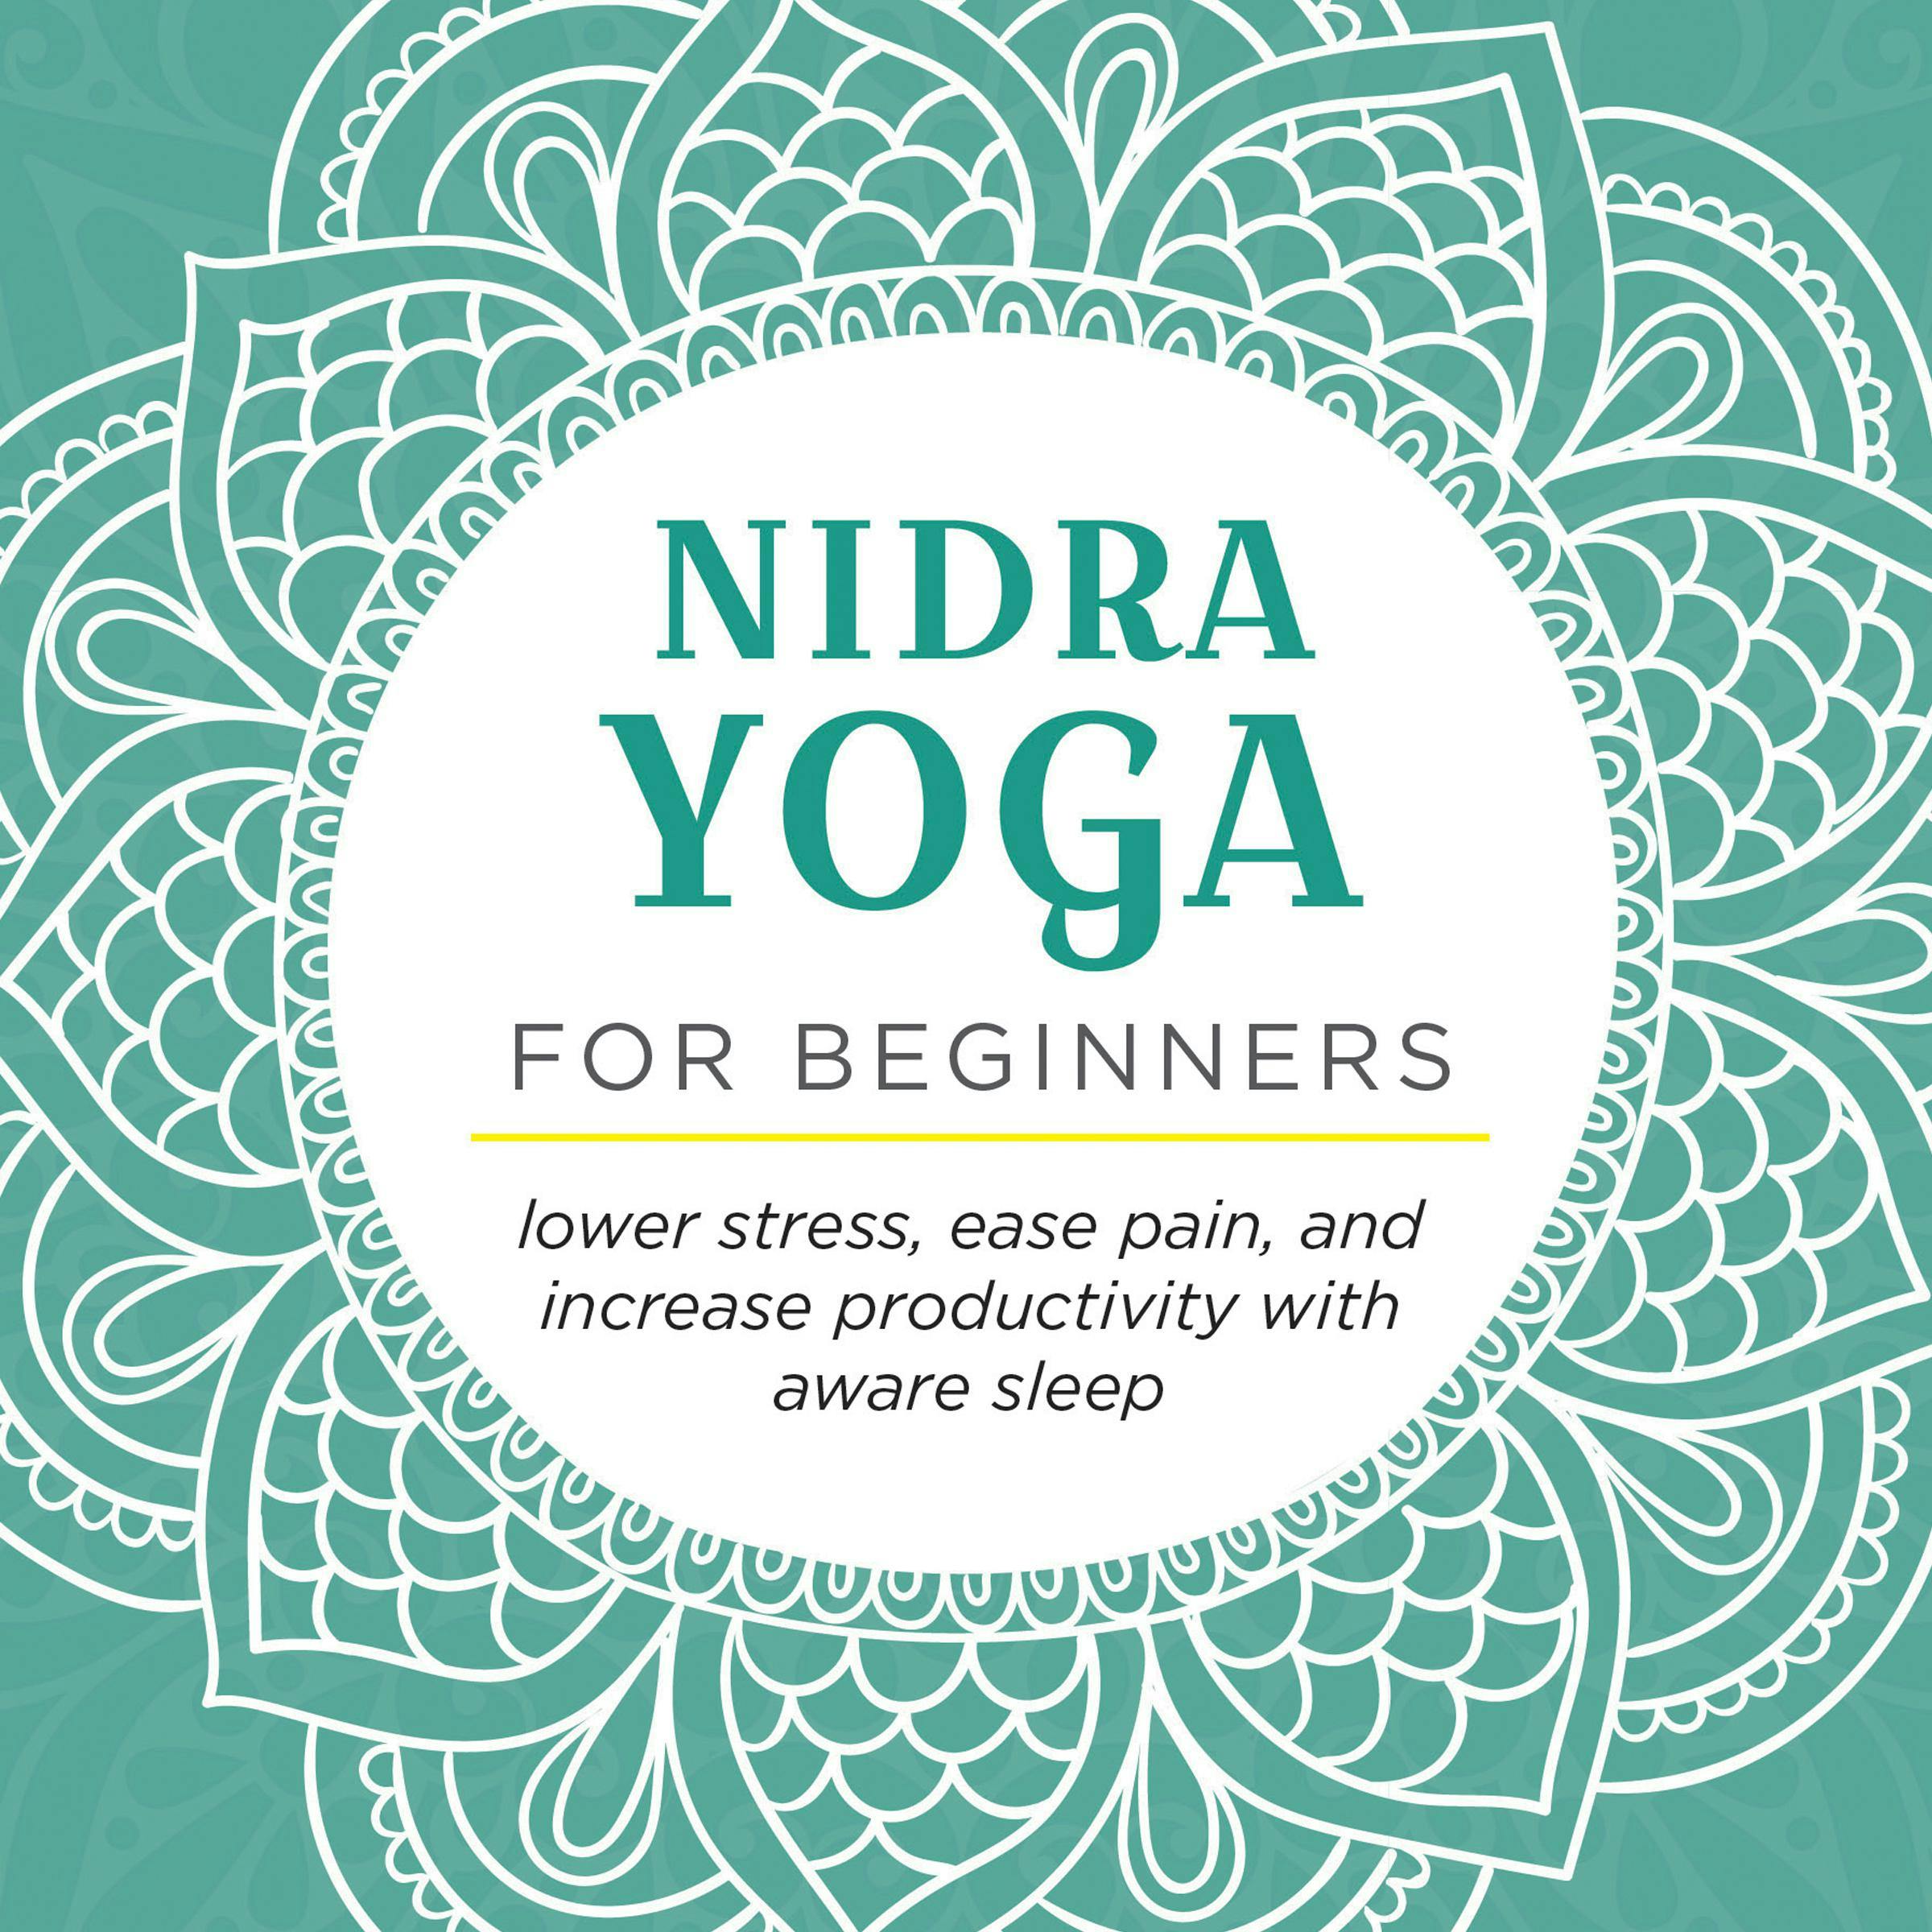 Nidra Yoga for beginners: Lower stress, ease pain, and increase productivity with aware sleep - Ella Rolando